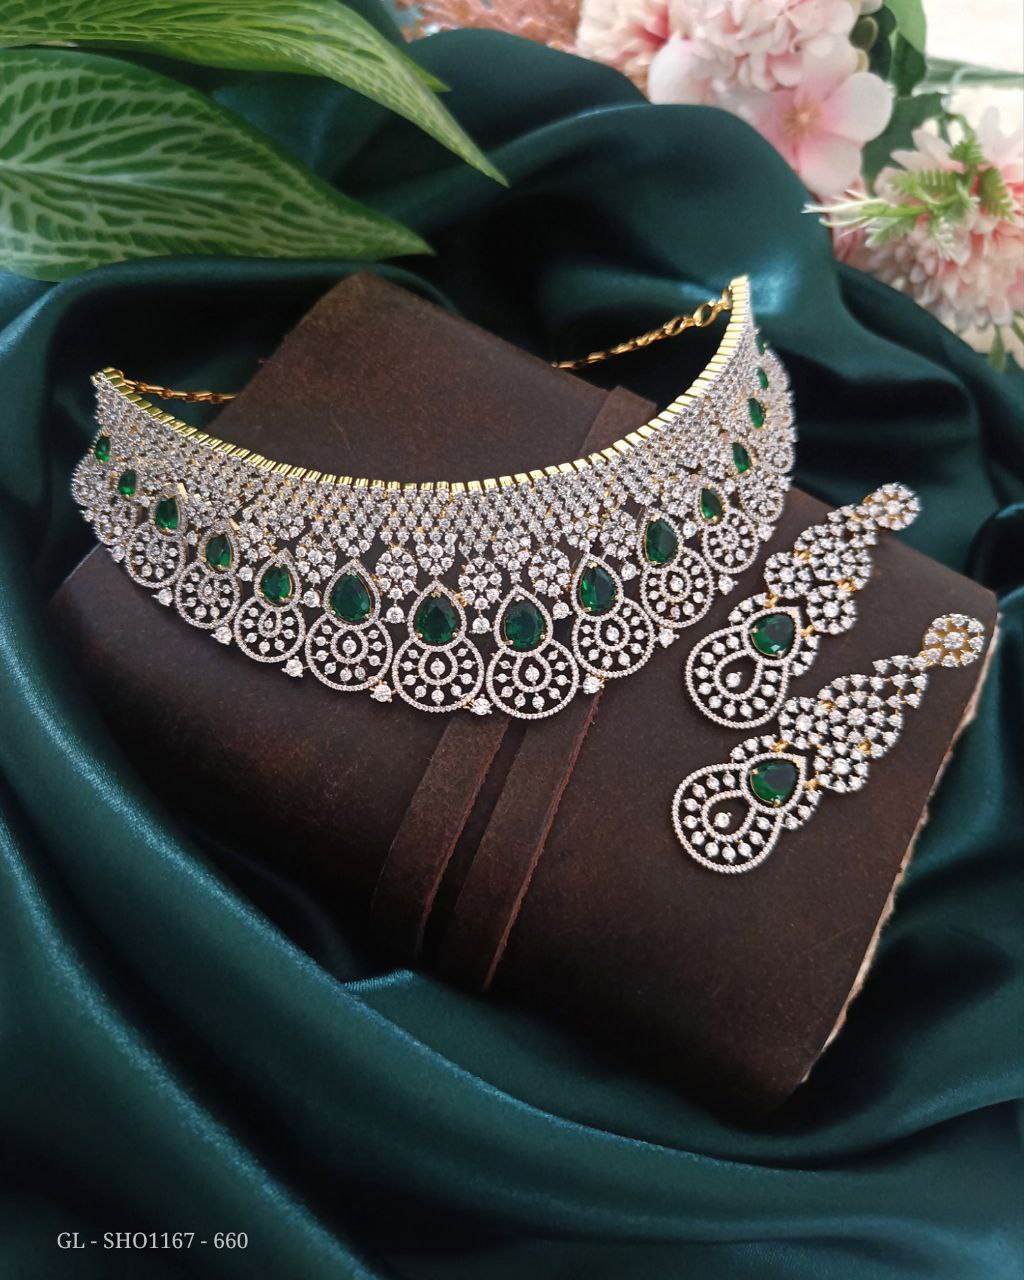 Gold Finsih AD Stones - Emerald Green Stones Alligned Floral Grand Necklace includes Beautiful Earrings